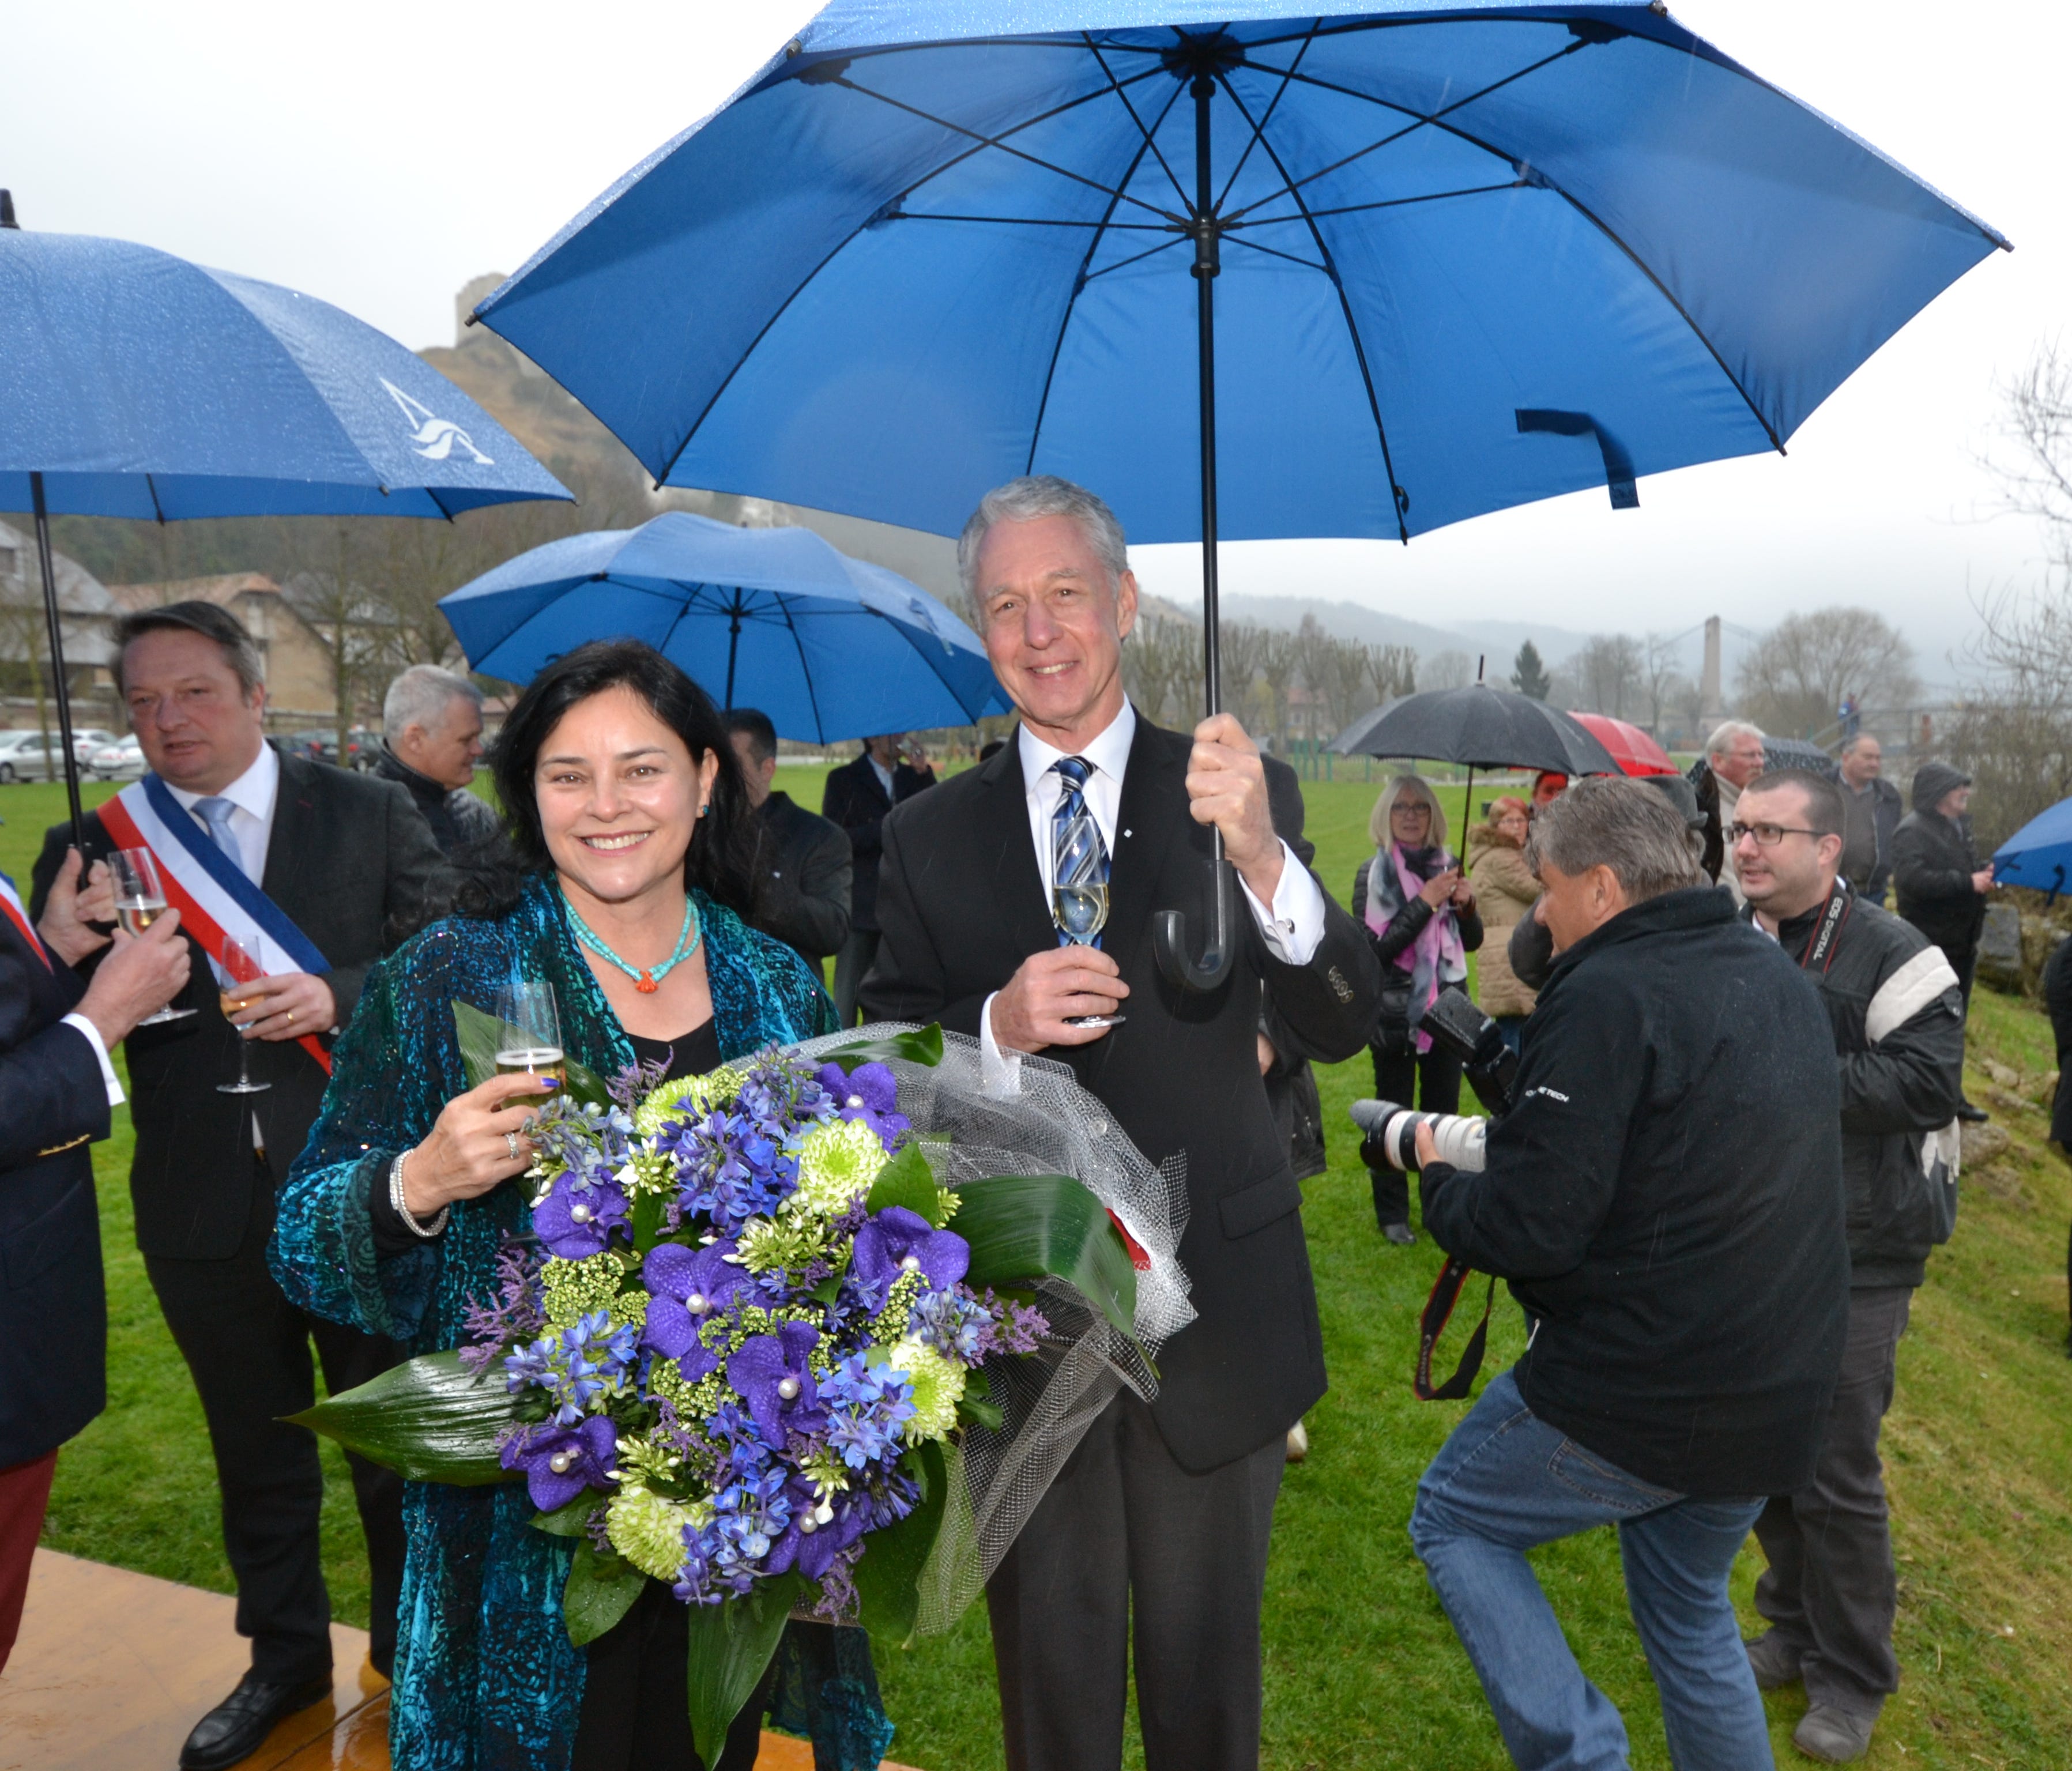 'Outlander' series author Diana Gabaldon with Avalon Waterways' managing director Patrick Clark at the christening of Avalon's new Avalon Tapestry II in Les Andelys, France on March 24, 2015.